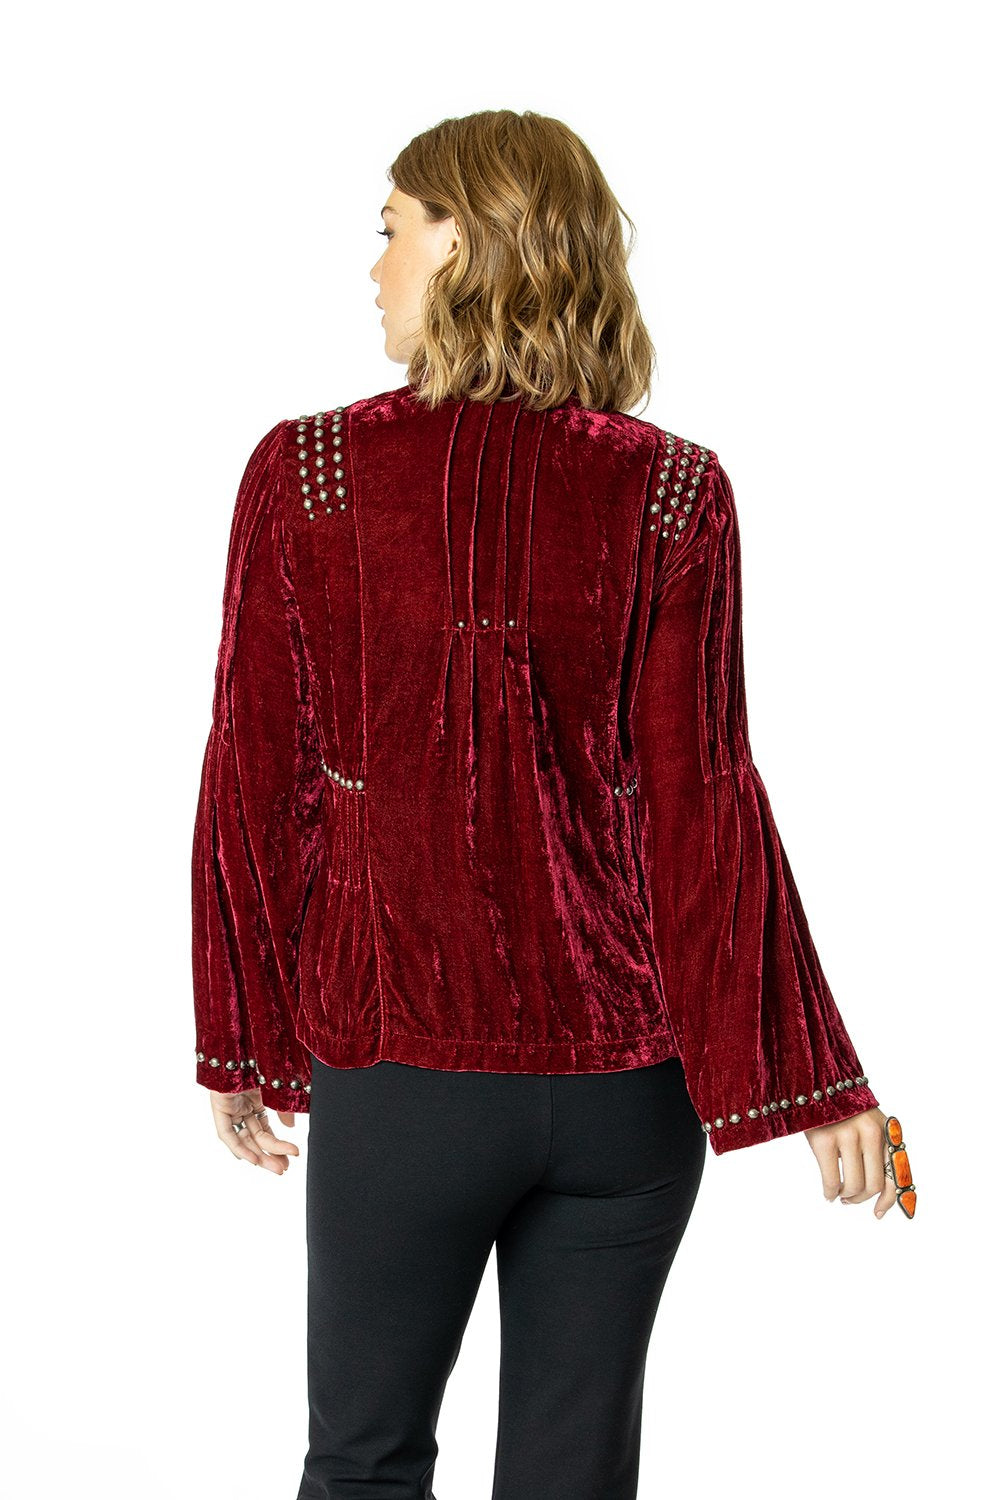 Load image into Gallery viewer, Double D Ranch Nash Flash Top in Milo 6Whiskey Velvet Nashville Fall 2020 T3385
